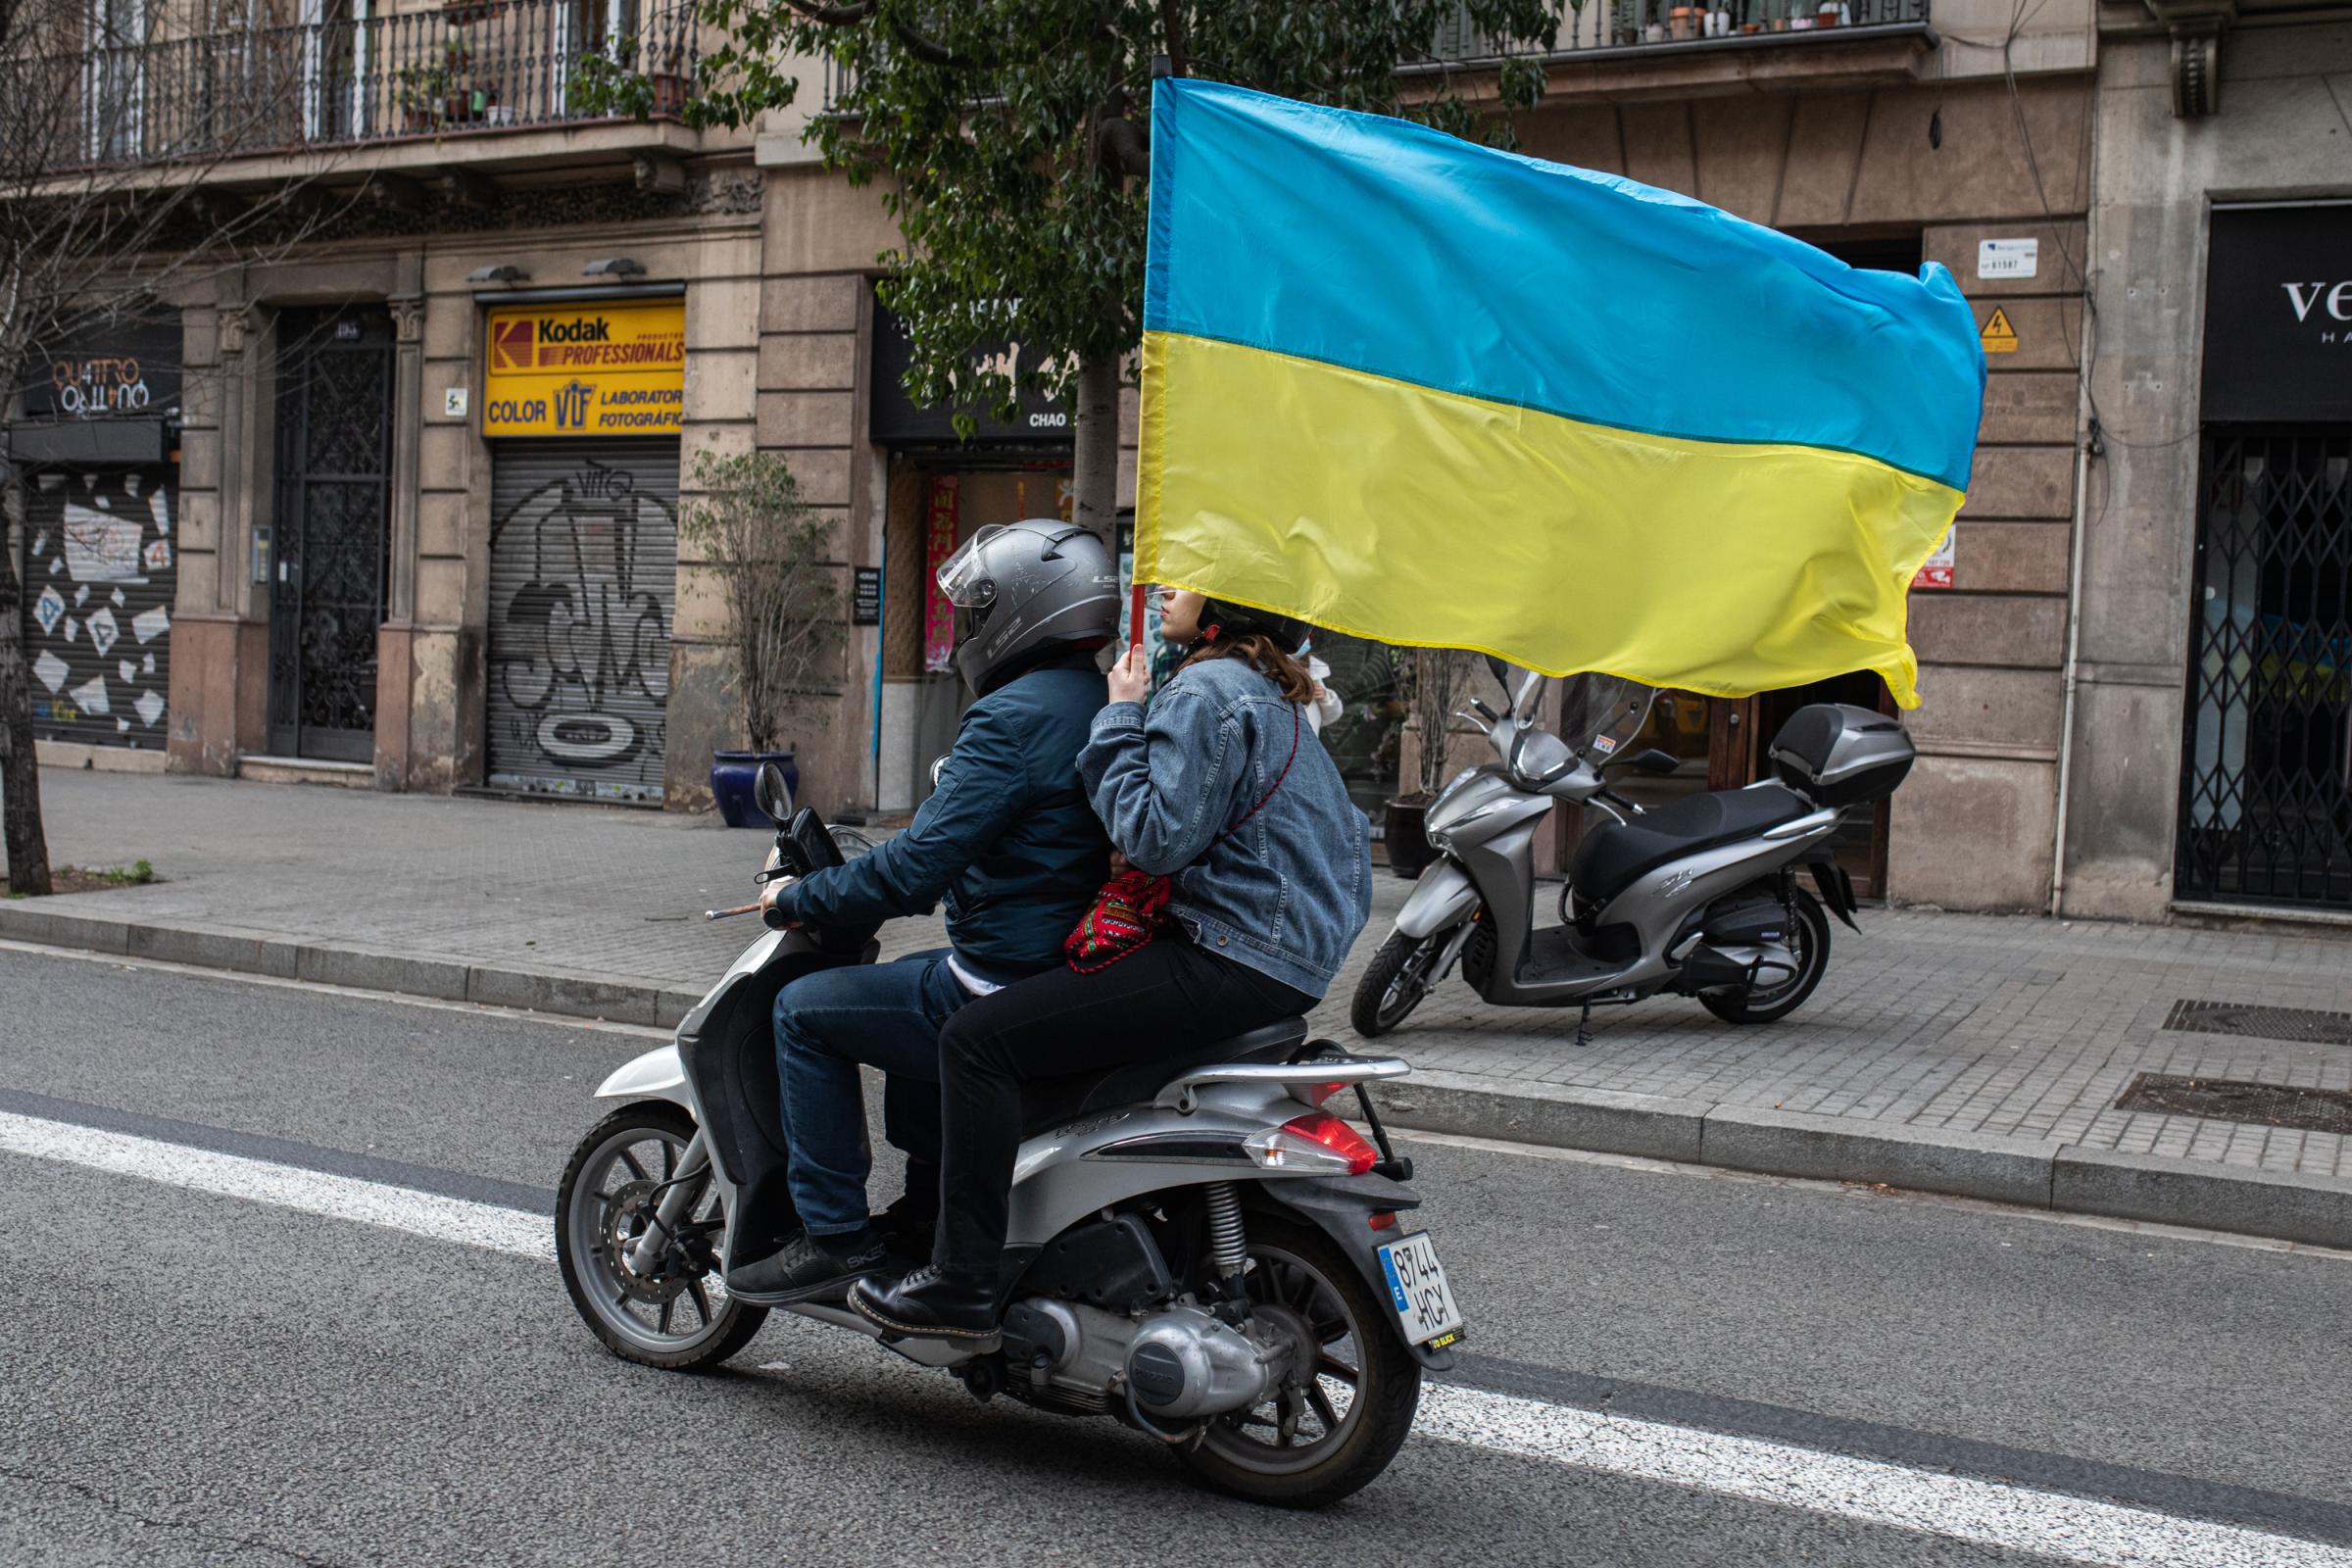 Protestors In Spain Rally For Ukraine After Russian Invasion - BARCELONA, SPAIN - FEBRUARY 26: A person carries a...